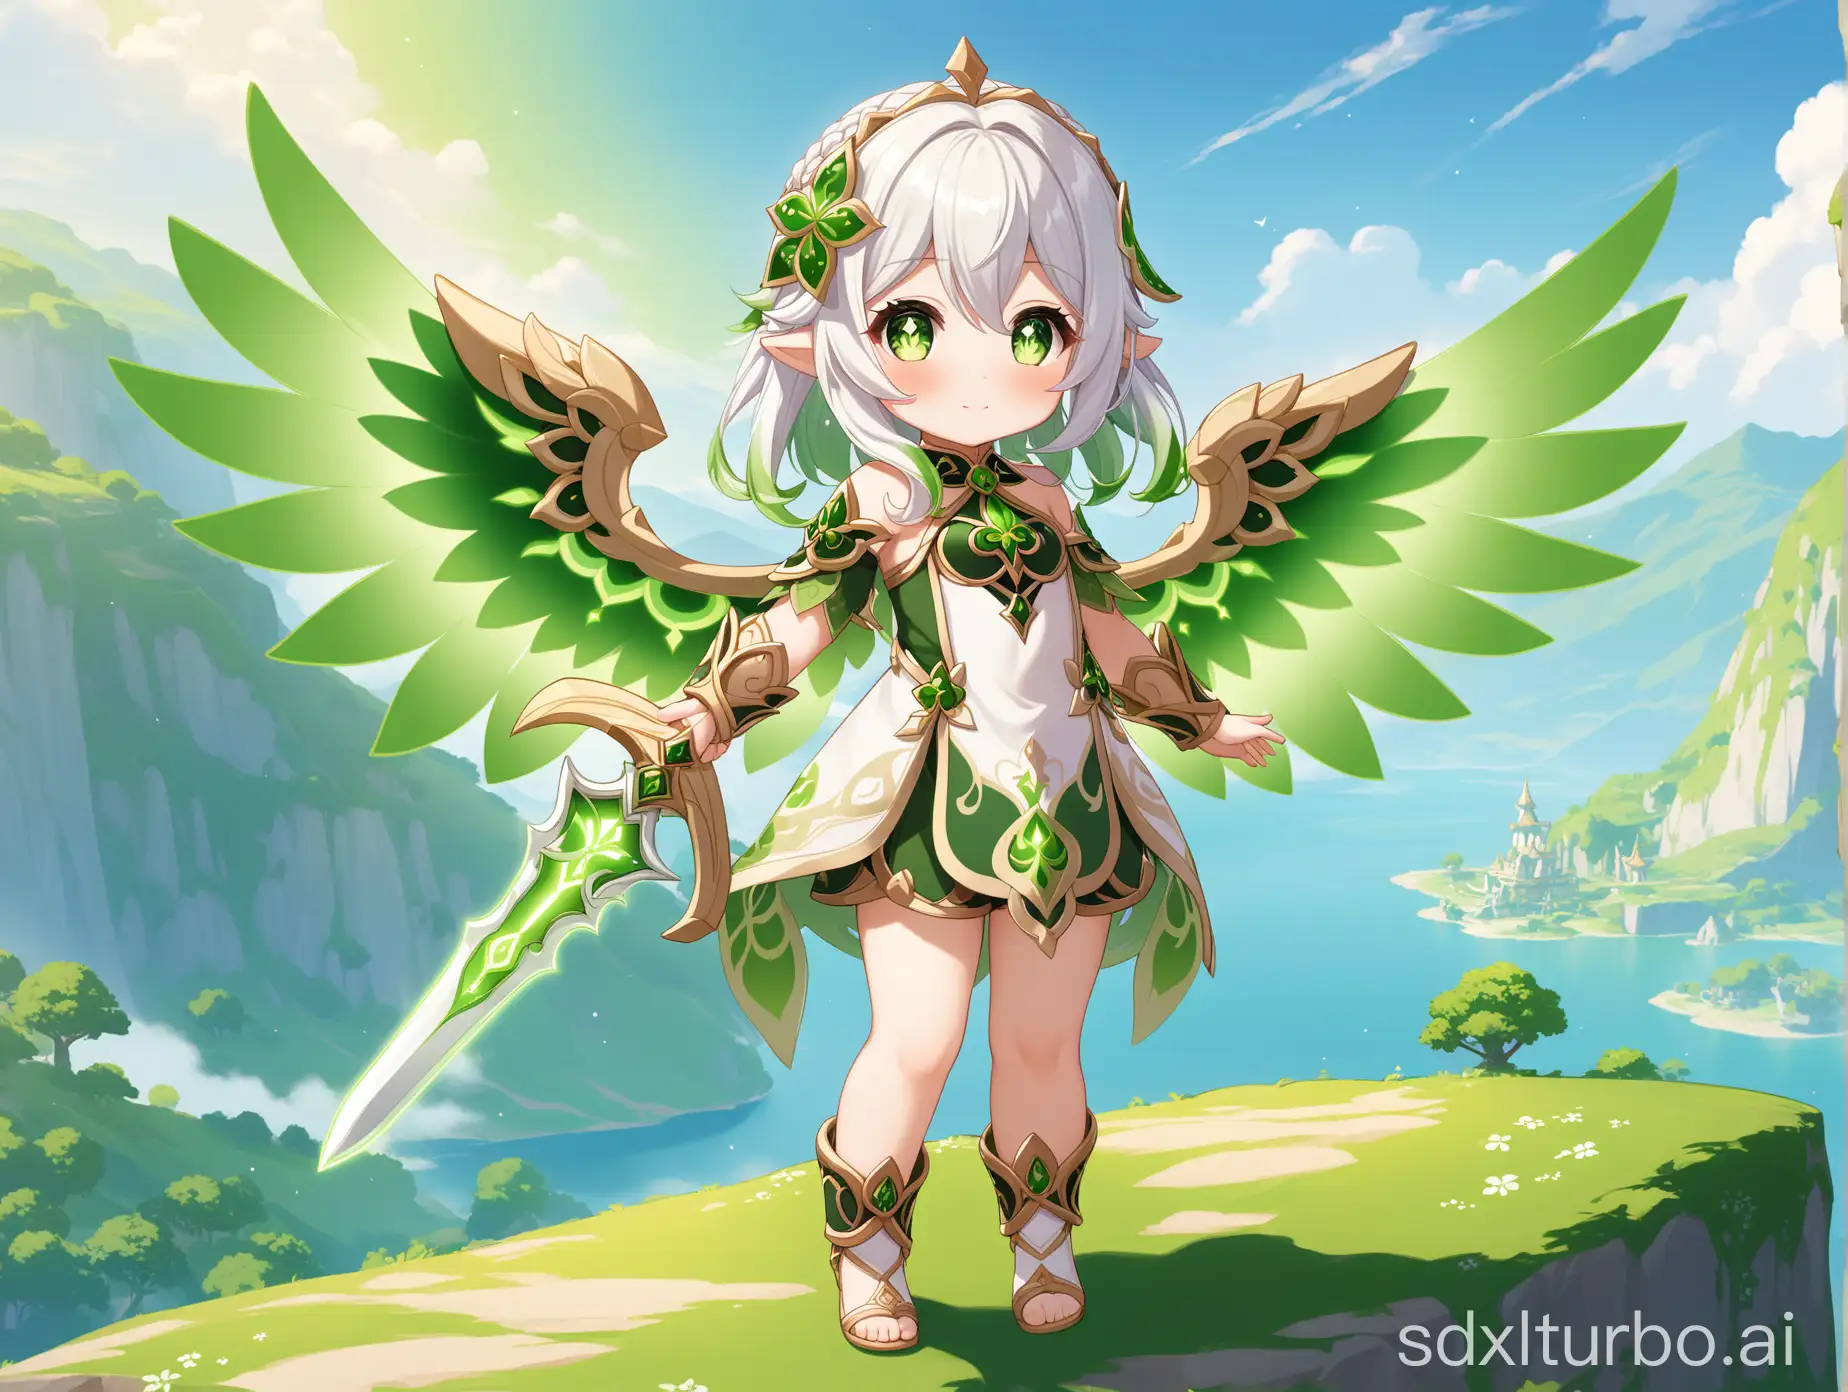 1 girl, Nahida (genshin Impact), Genshin Impact, loli, stands on the mountain, straight stance, angel with green wings behind, hand is raised and holds a green sword, looking to the right <lora:LECO_LessChibiAndDollsXL:-1.5> good anatomy, natural fingers, best quality, masterpiece rating: general <lora:sdxl2-flat2-512b:-0.5>